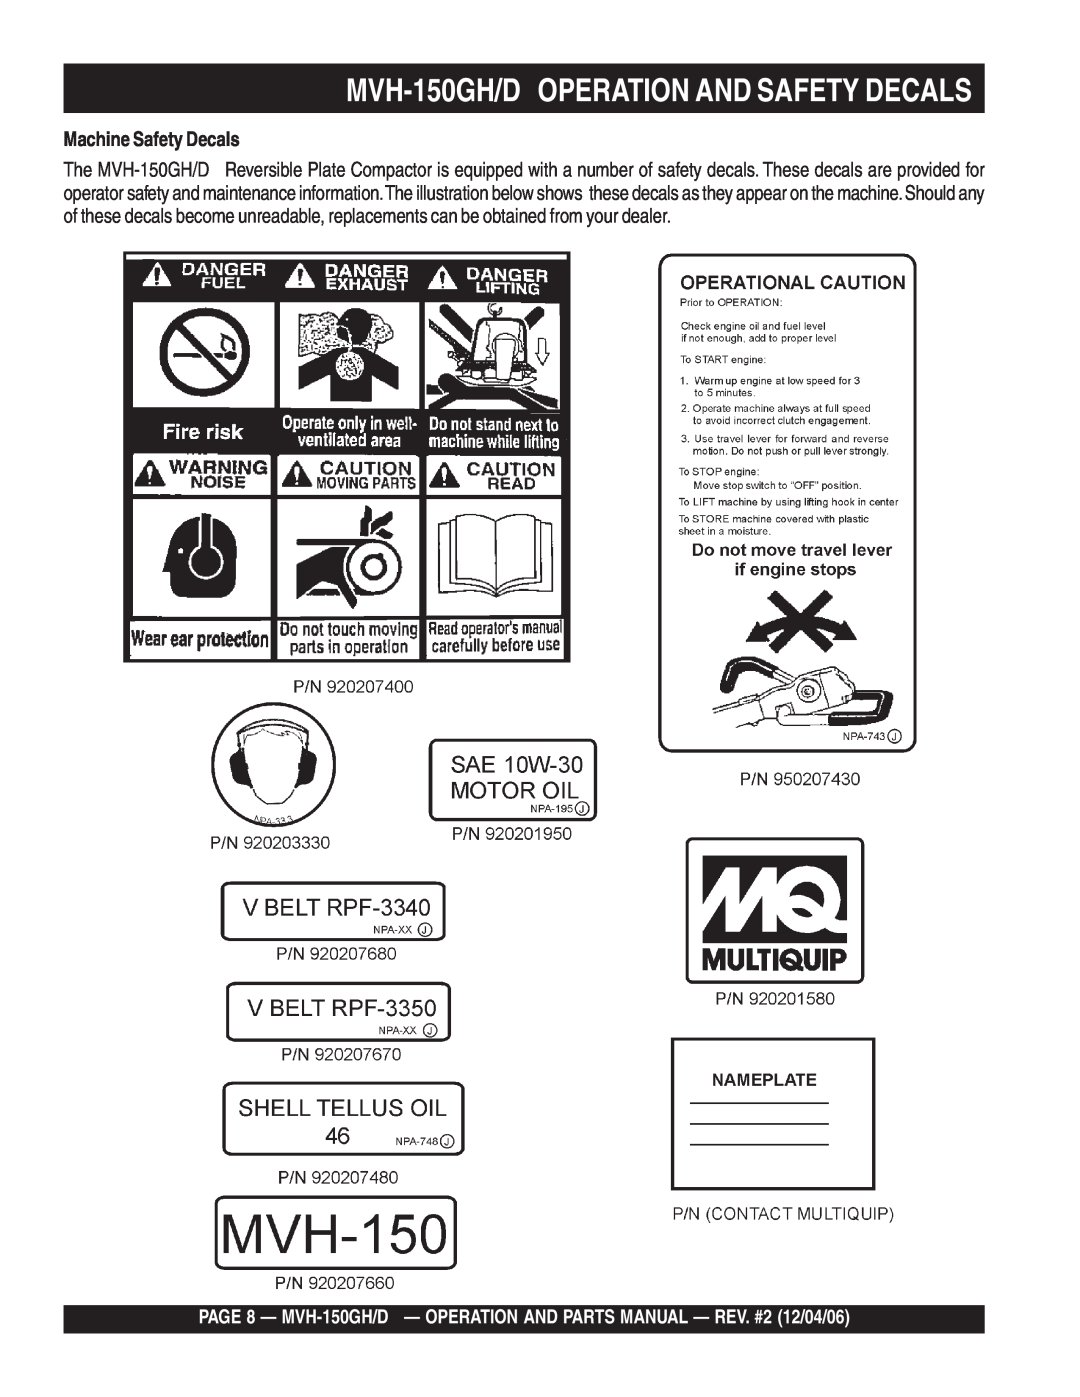 Multiquip MVH-150D manual MVH-150GH/D OPERATION AND SAFETY DECALS, Machine Safety Decals 